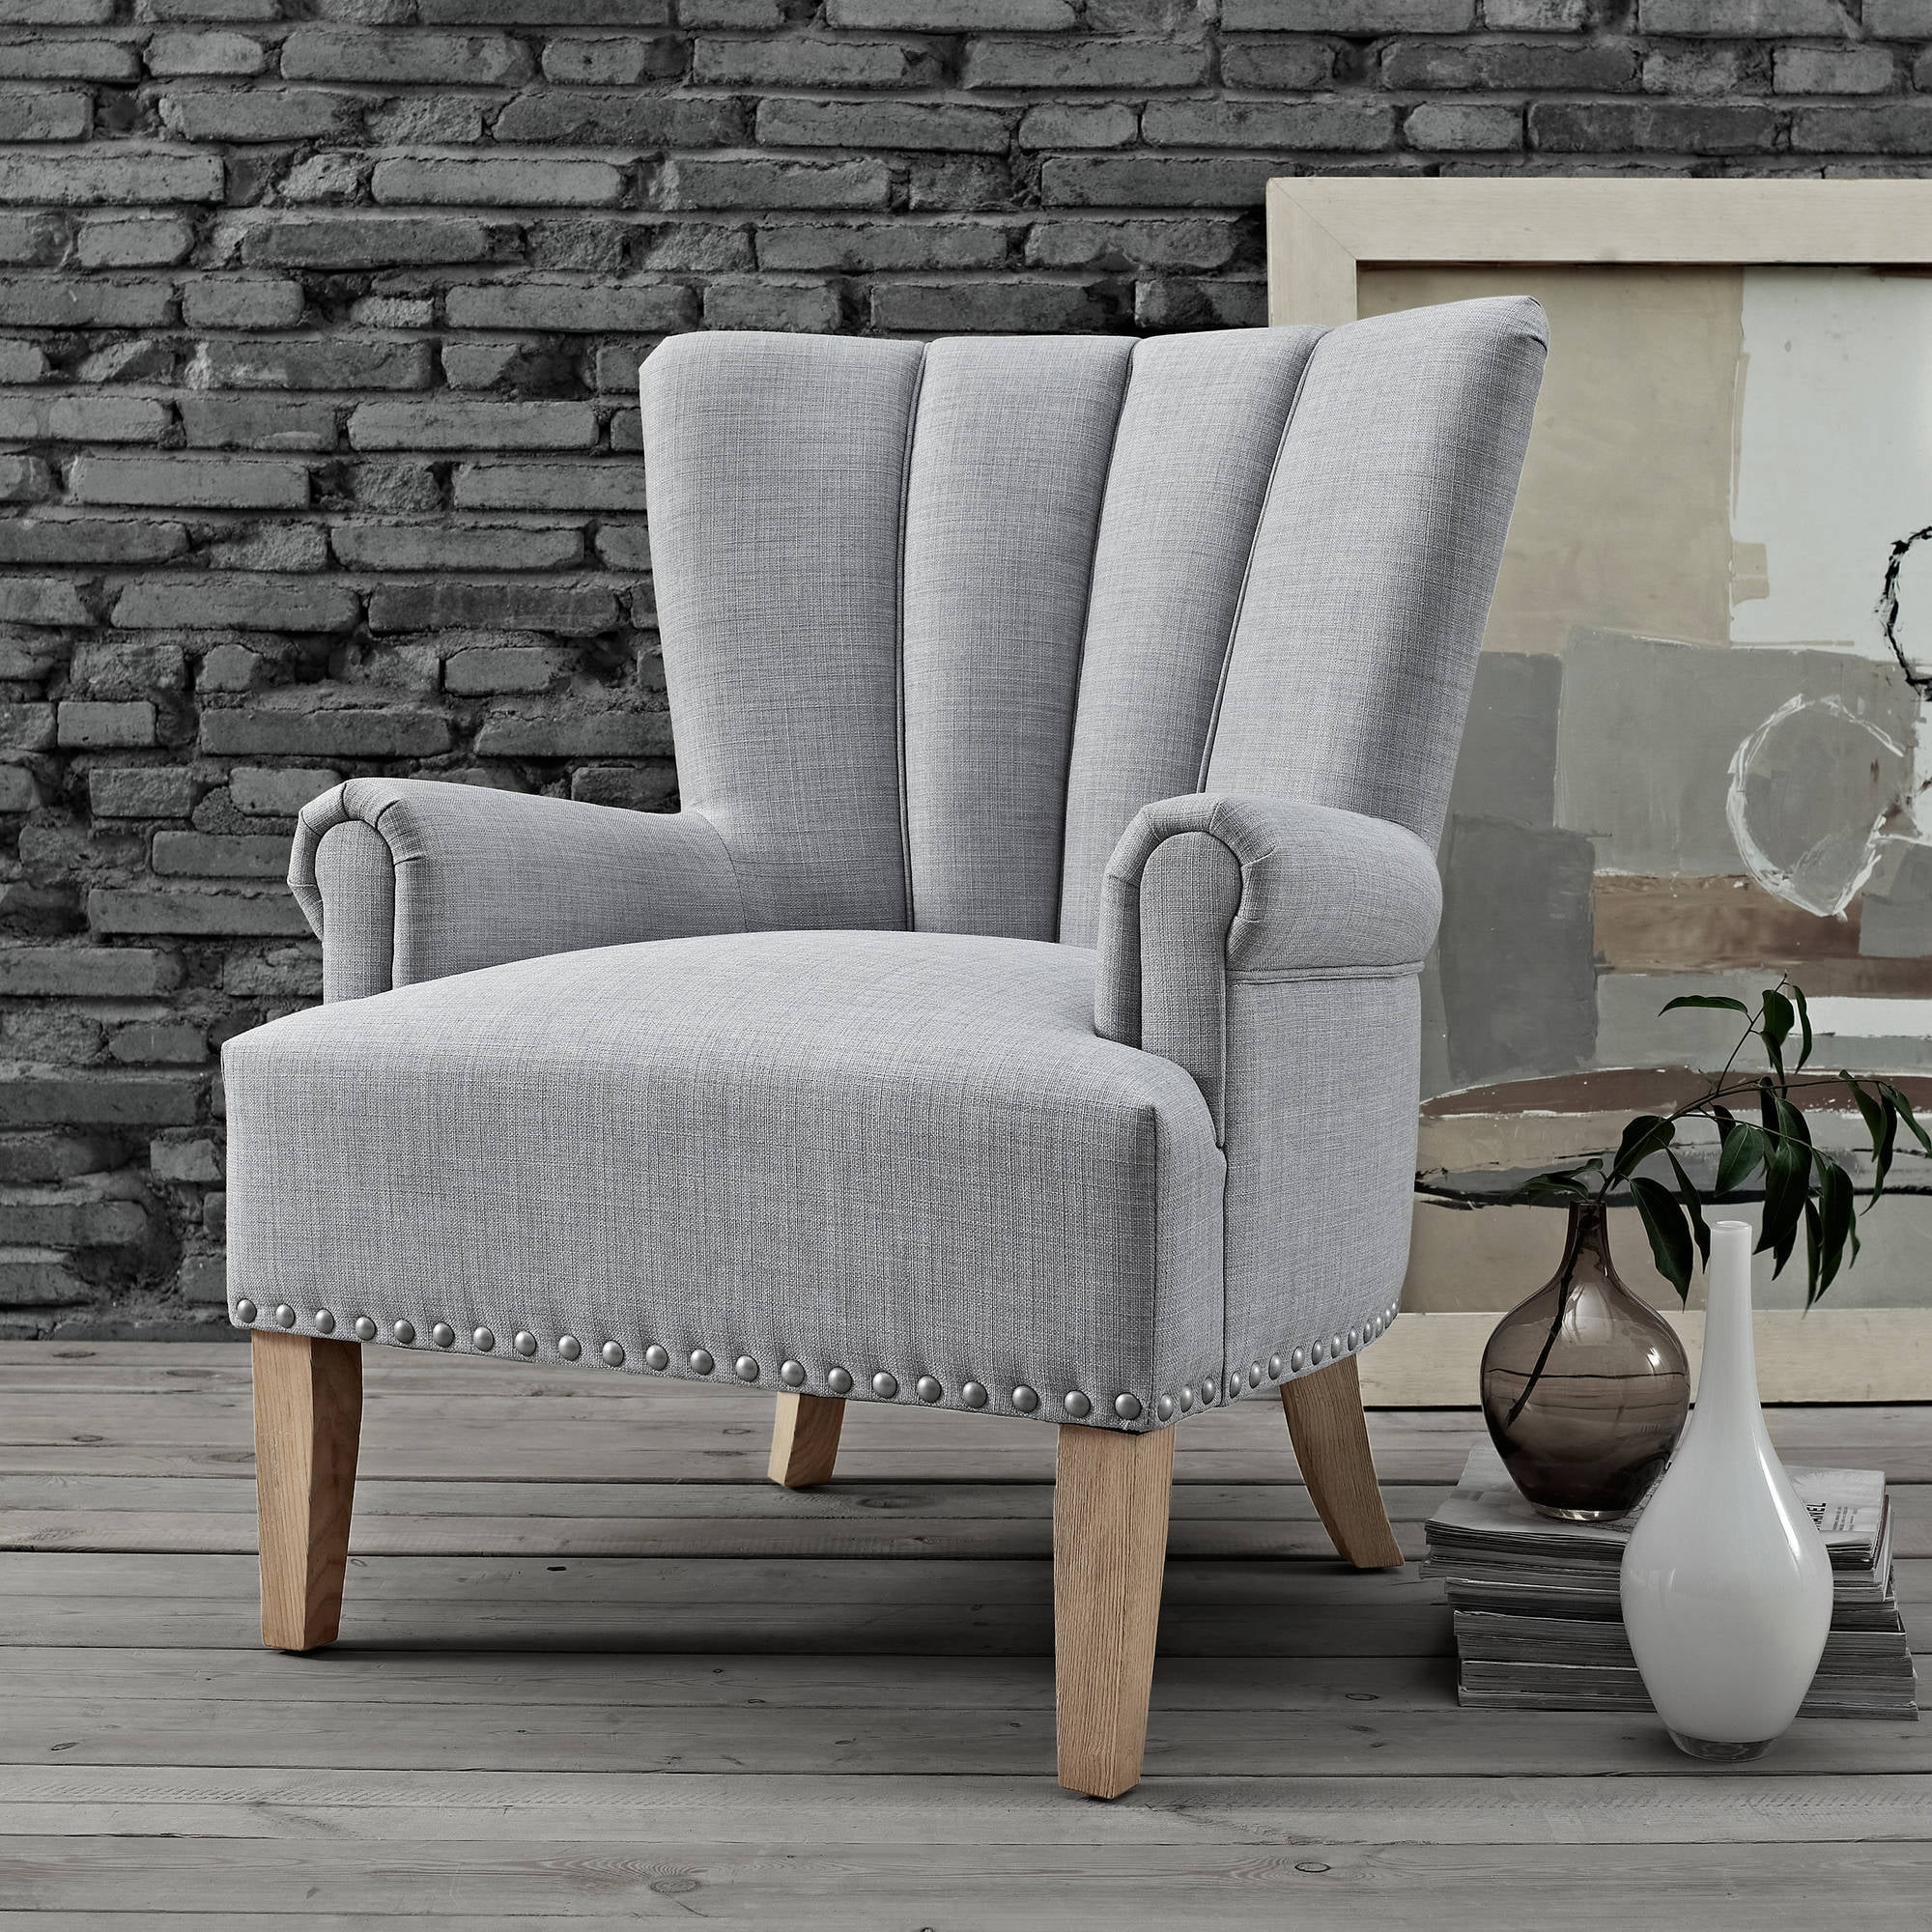 Accent Chairs Under 100 Off 60, Accent Chairs With Arms Under 100